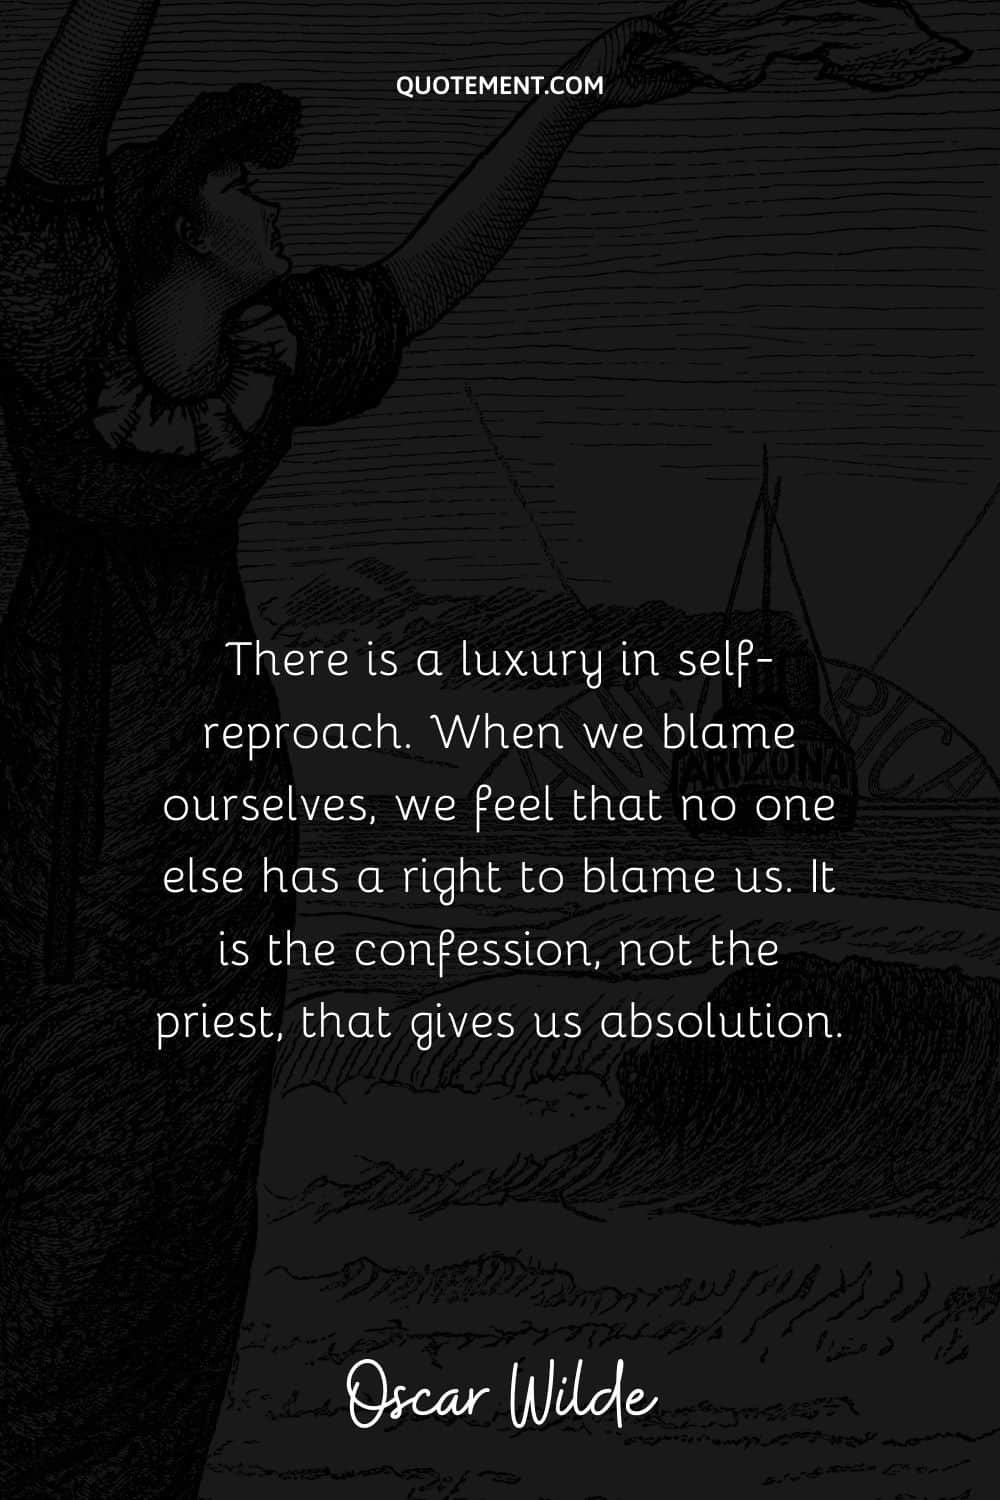 “There is a luxury in self-reproach. When we blame ourselves, we feel that no one else has a right to blame us. It is the confession, not the priest, that gives us absolution.”